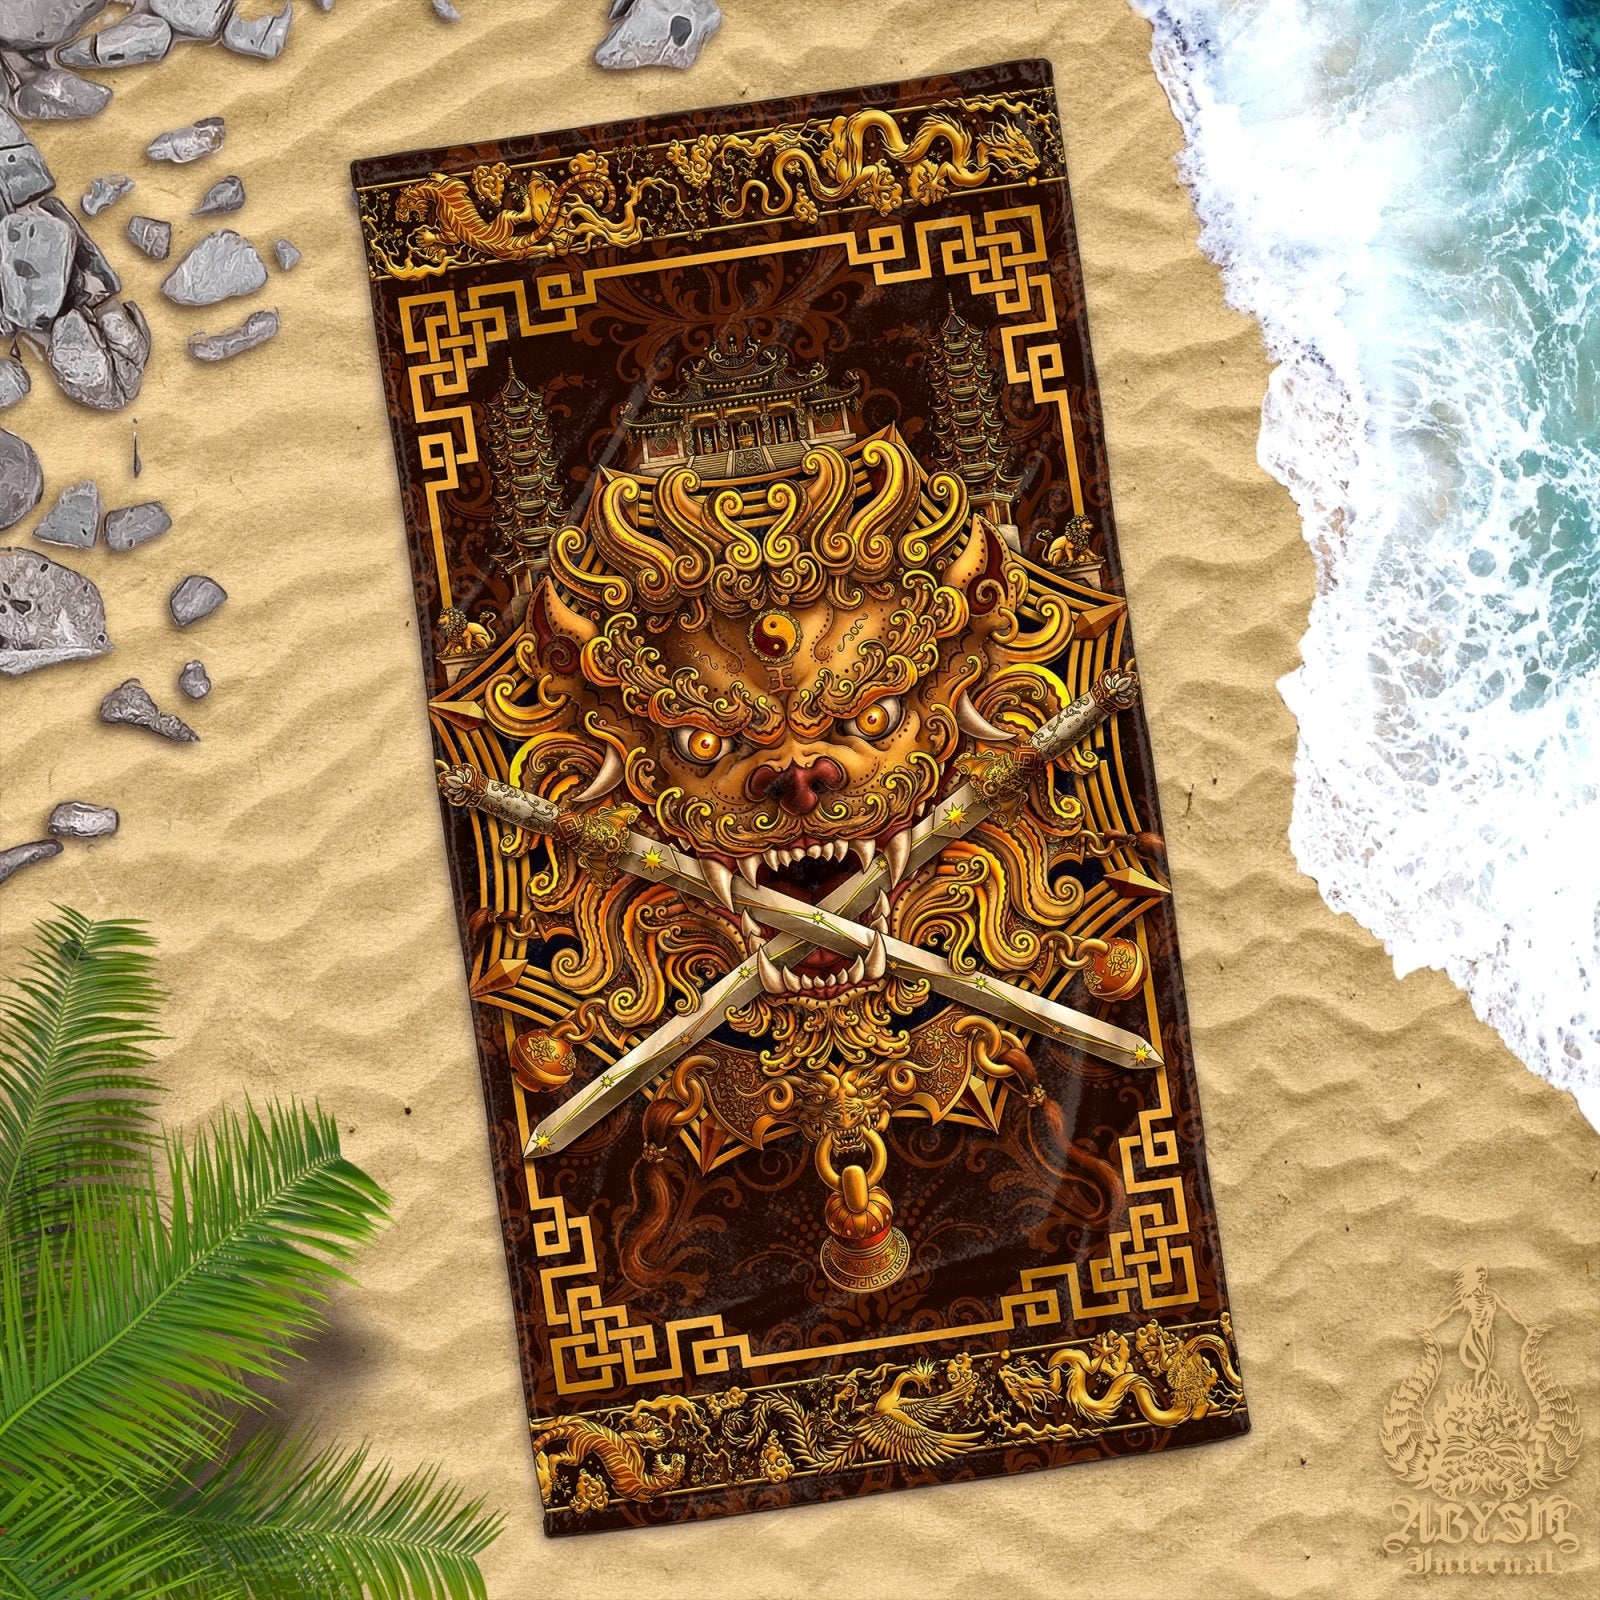 Asian Lion Beach Towel, Taiwan Sword Lion, Chinese Art, Fantasy Gift for Gamers - Gold - Abysm Internal